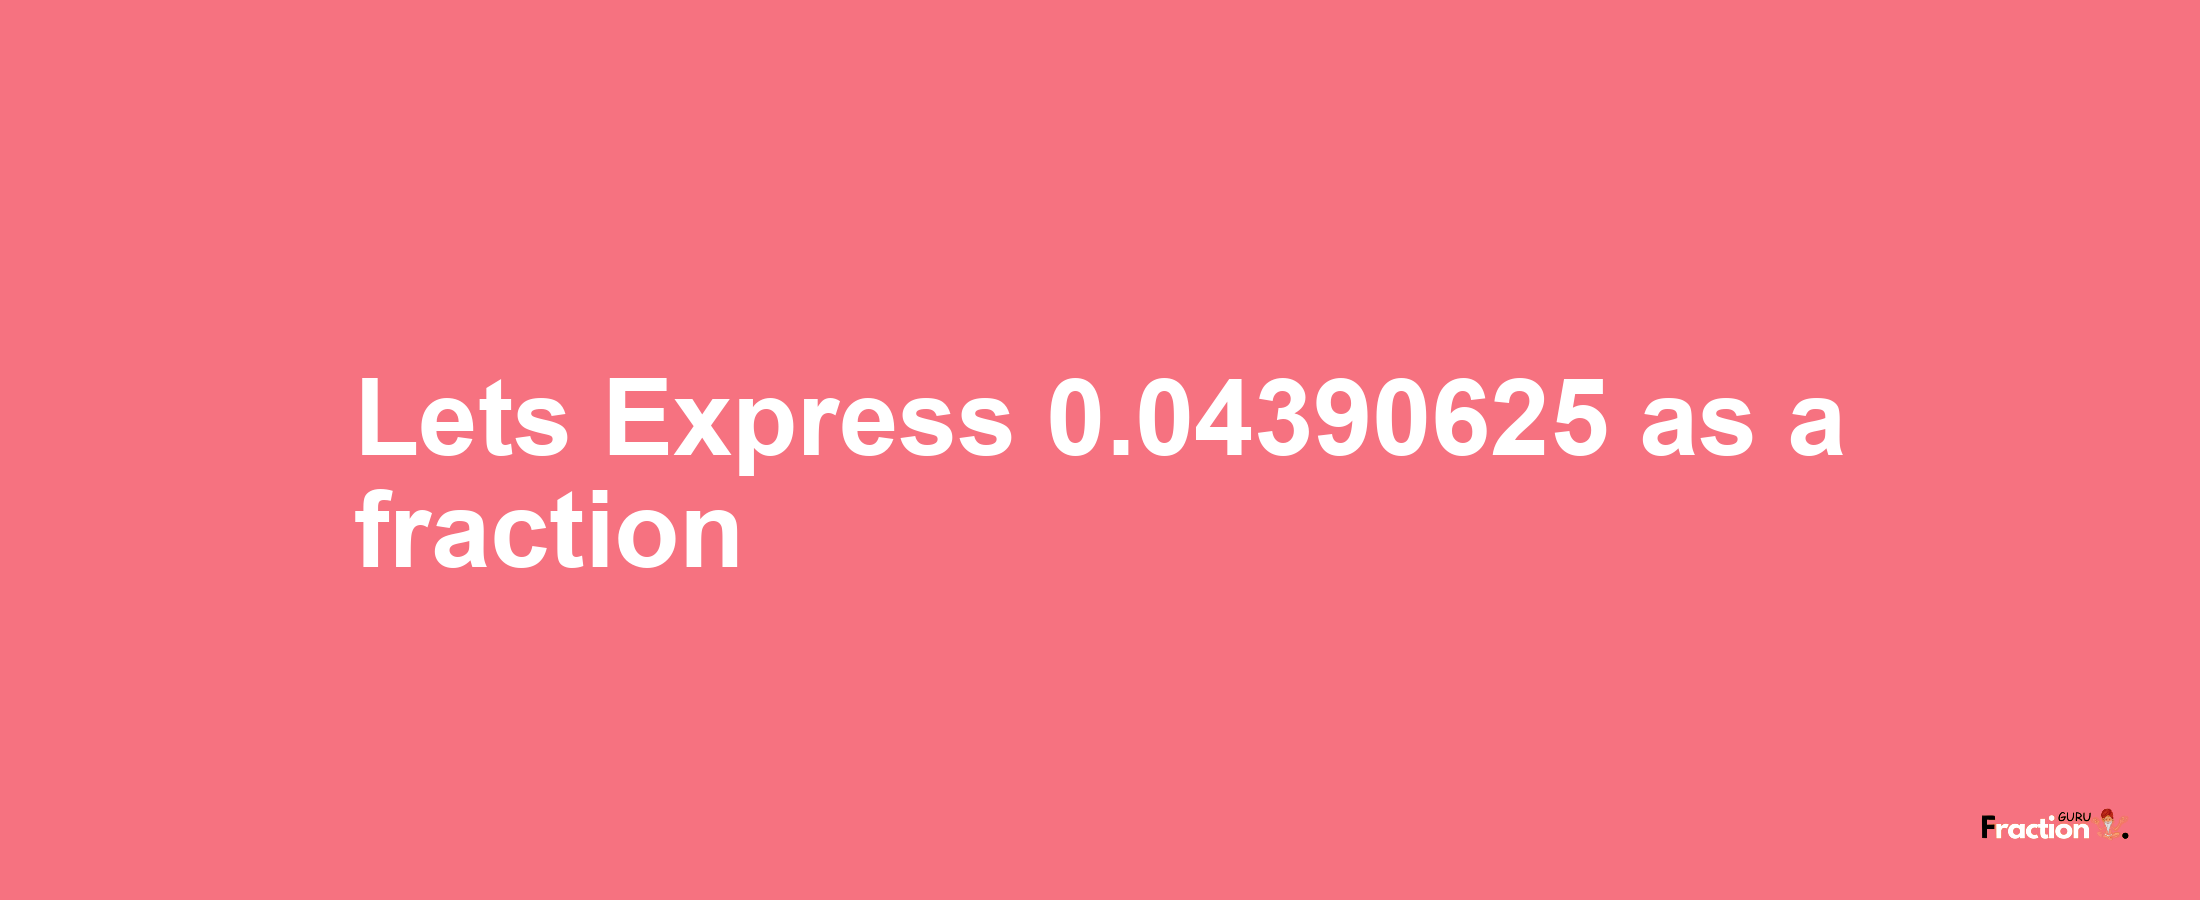 Lets Express 0.04390625 as afraction